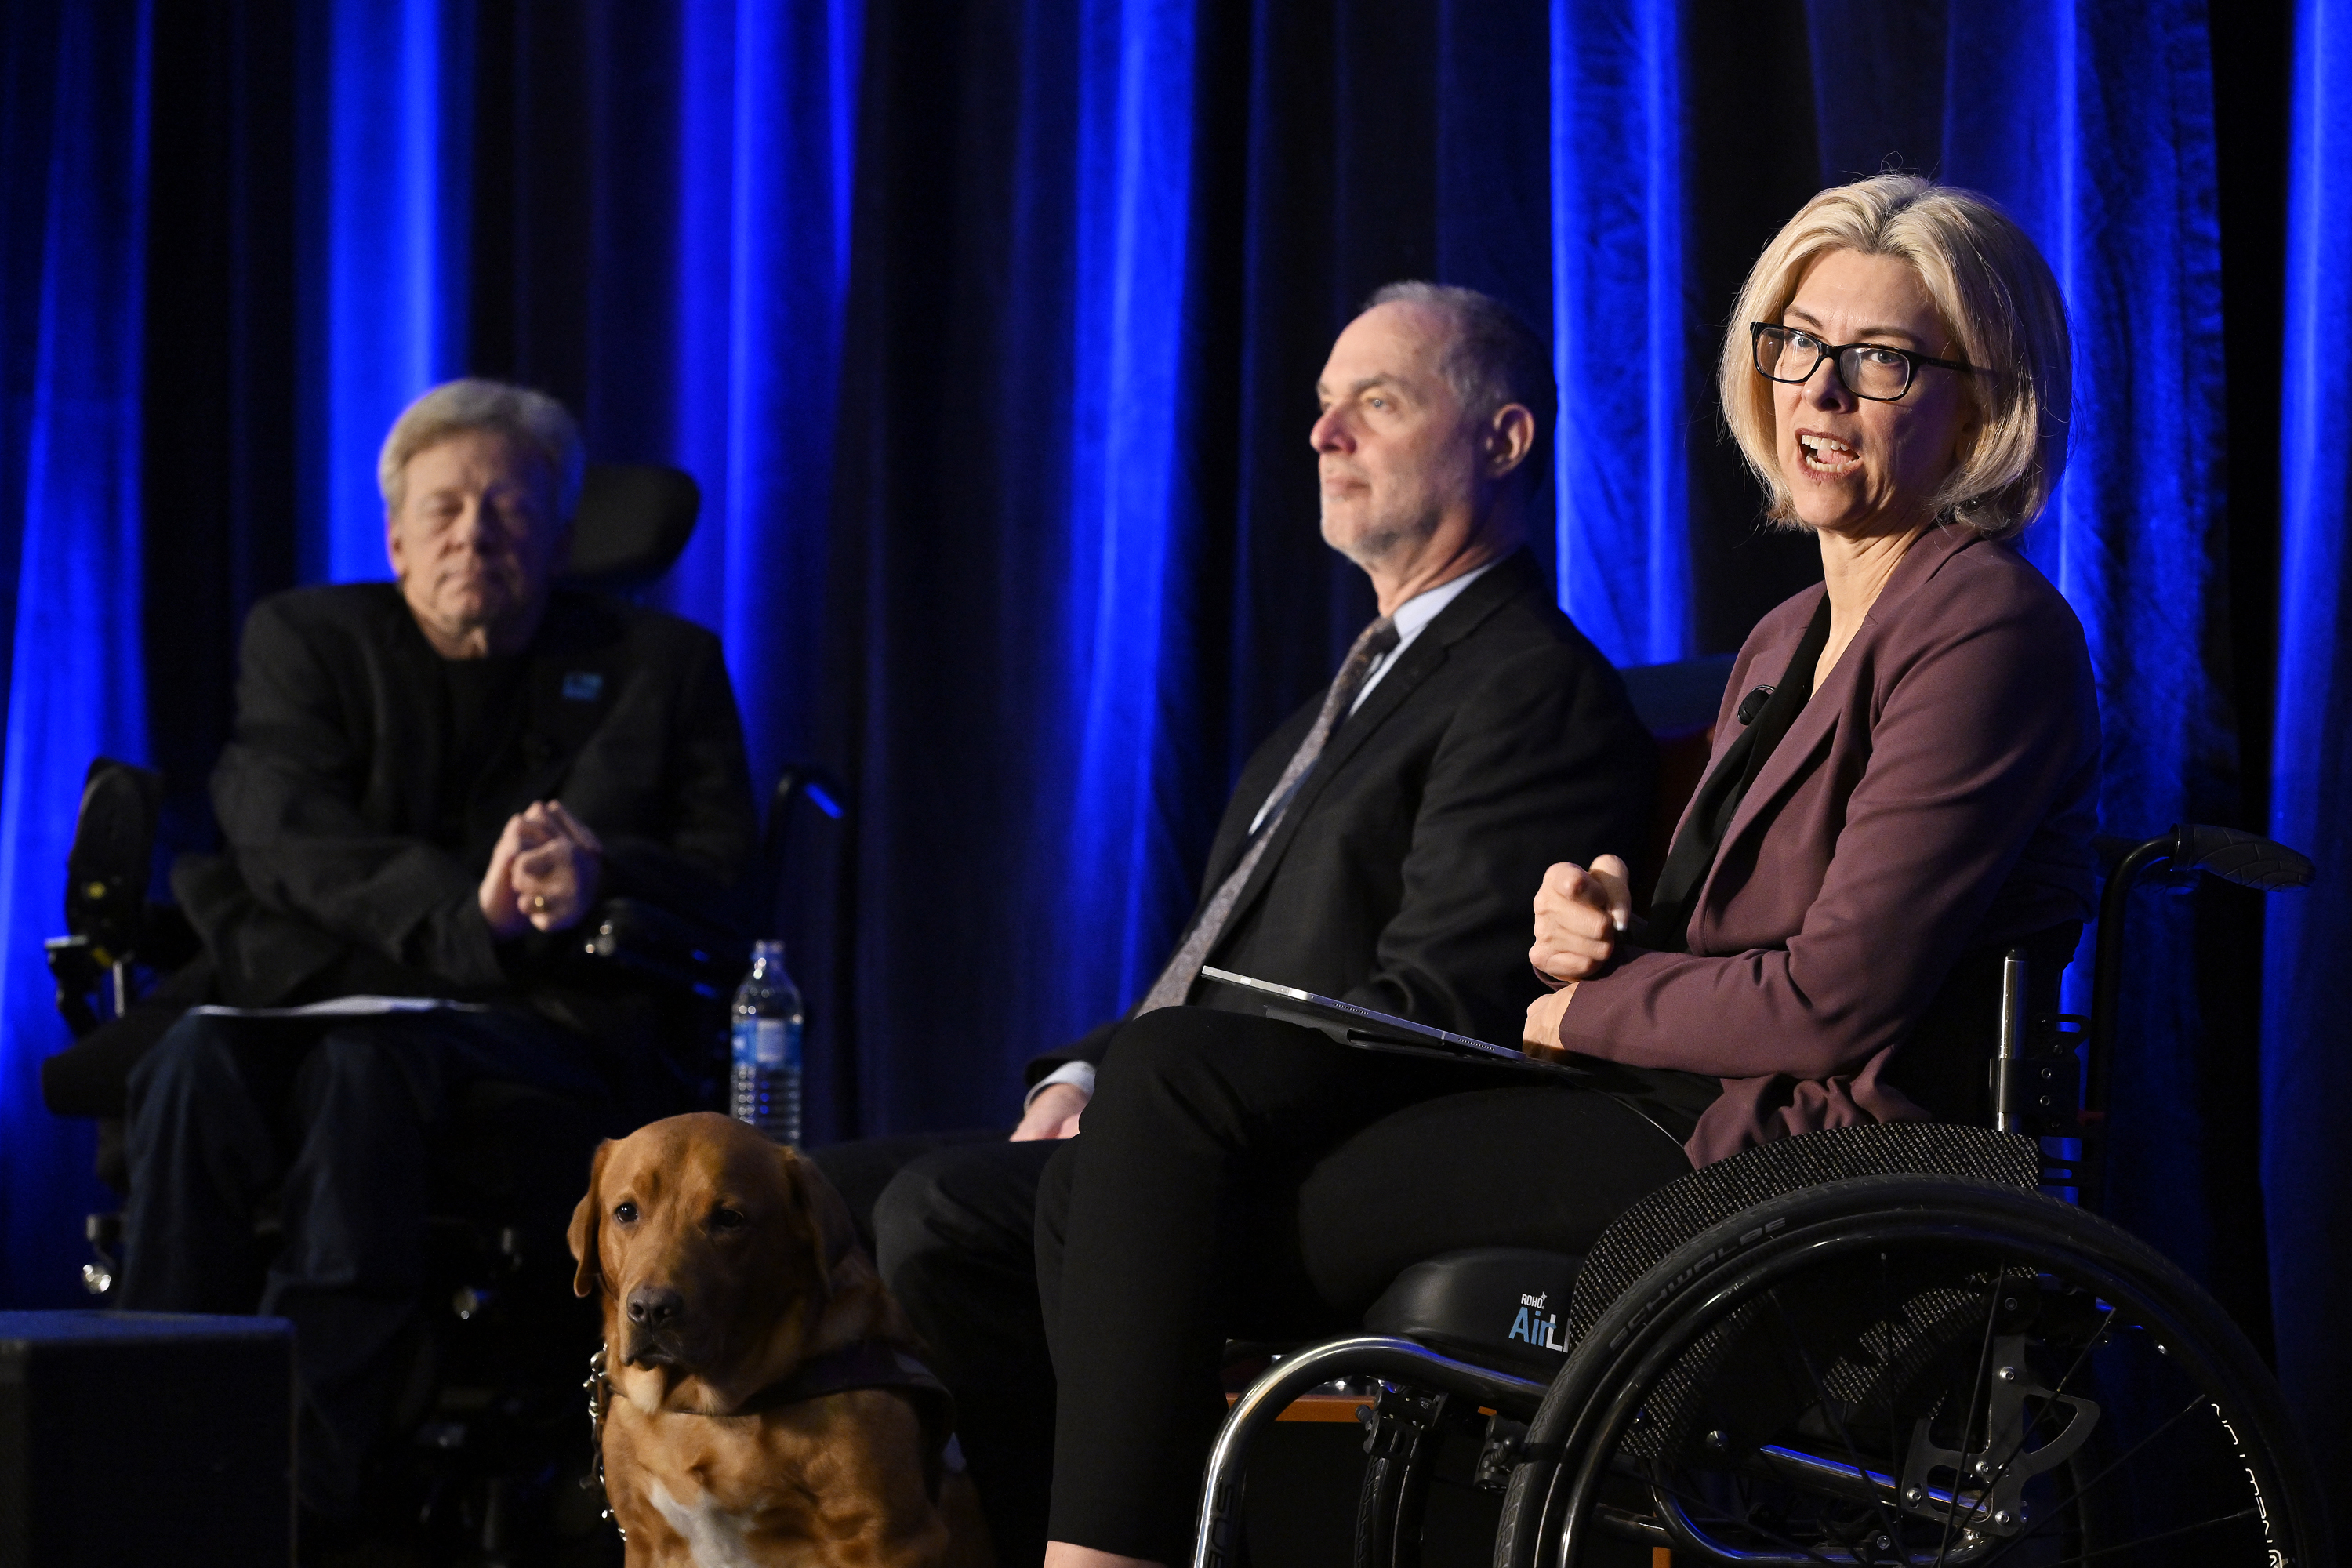 Stephanie Cadieux, who is wearing a purple blazer and using a wheelchair, on stage with Michael Gottheil and Brad McConnell who are also both using wheelchairs.